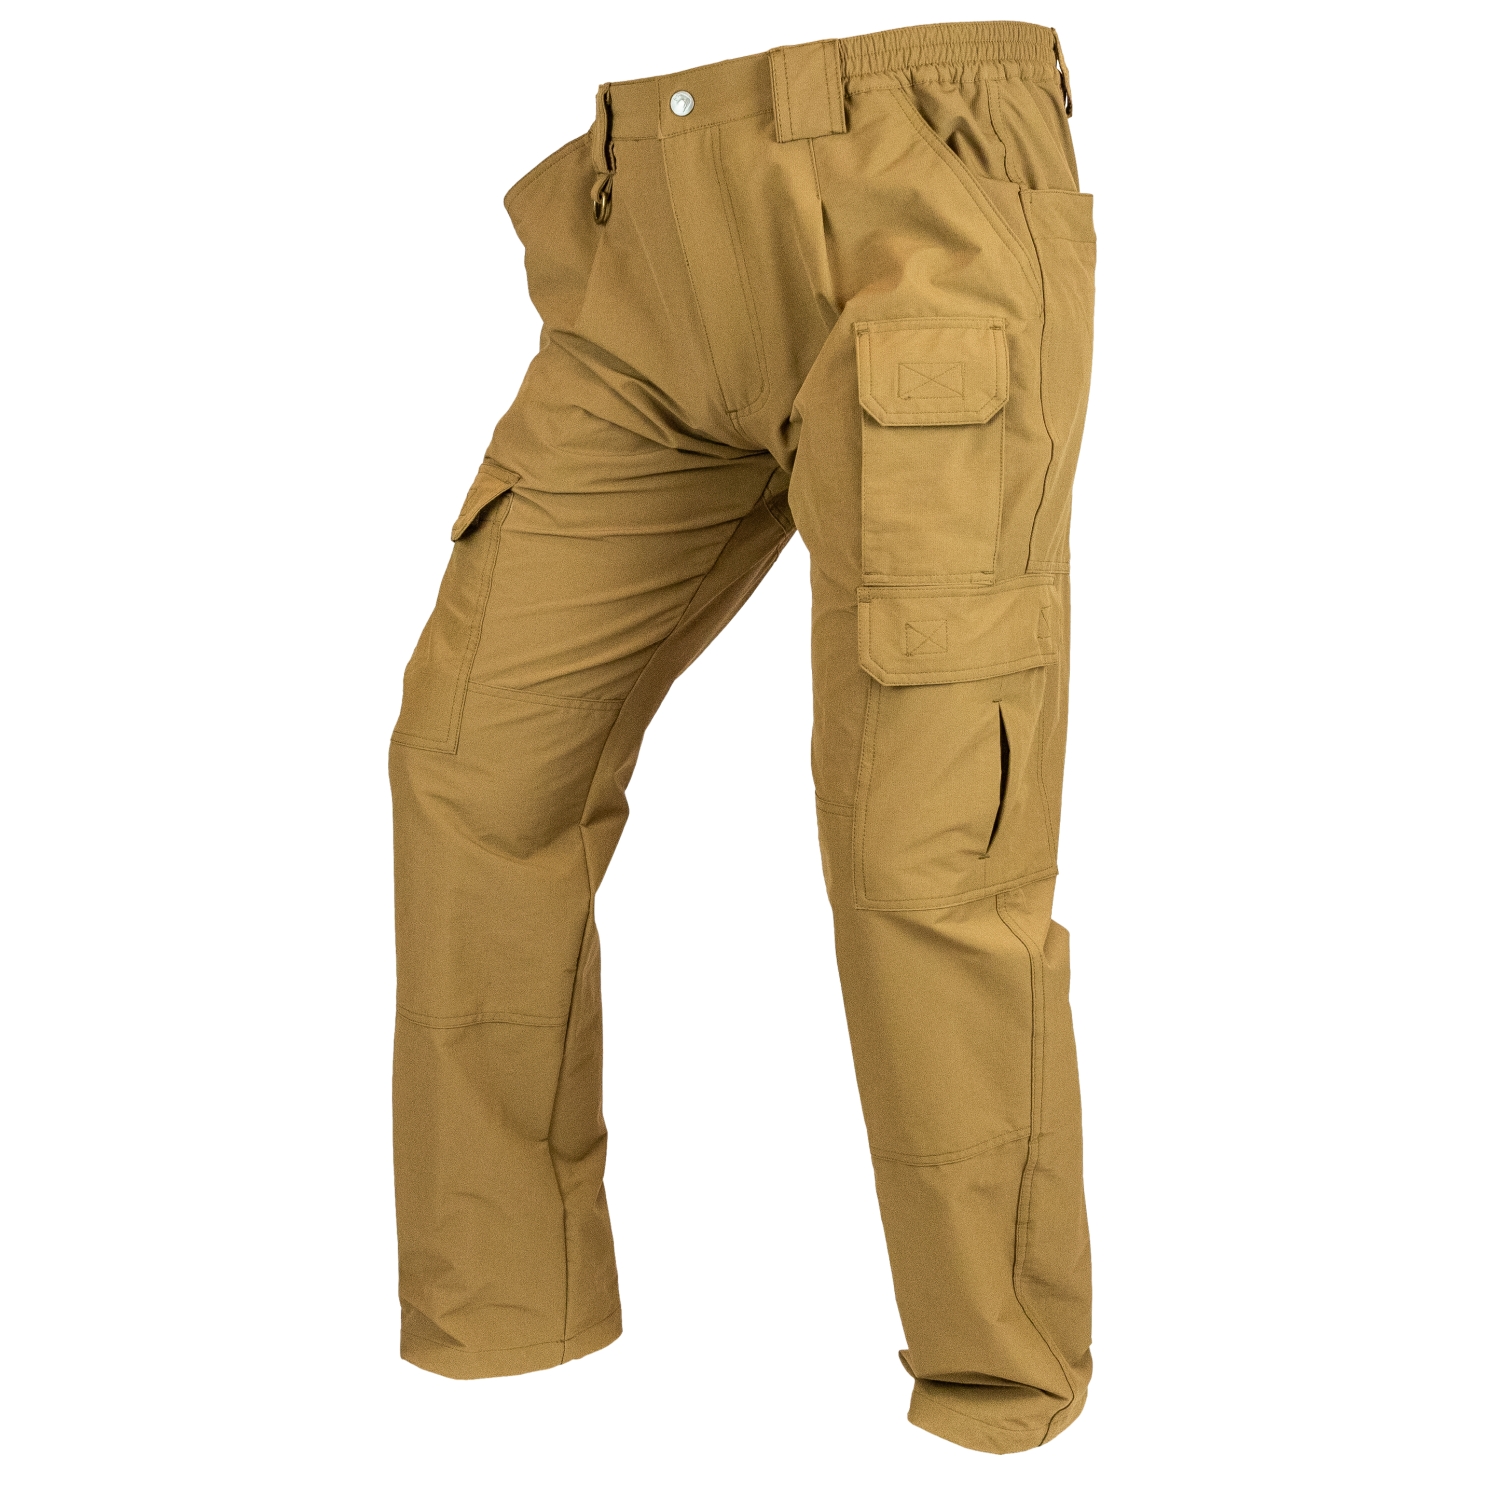 Viper Tactical Stretch Pants Airsoft Combats Military Trousers ...